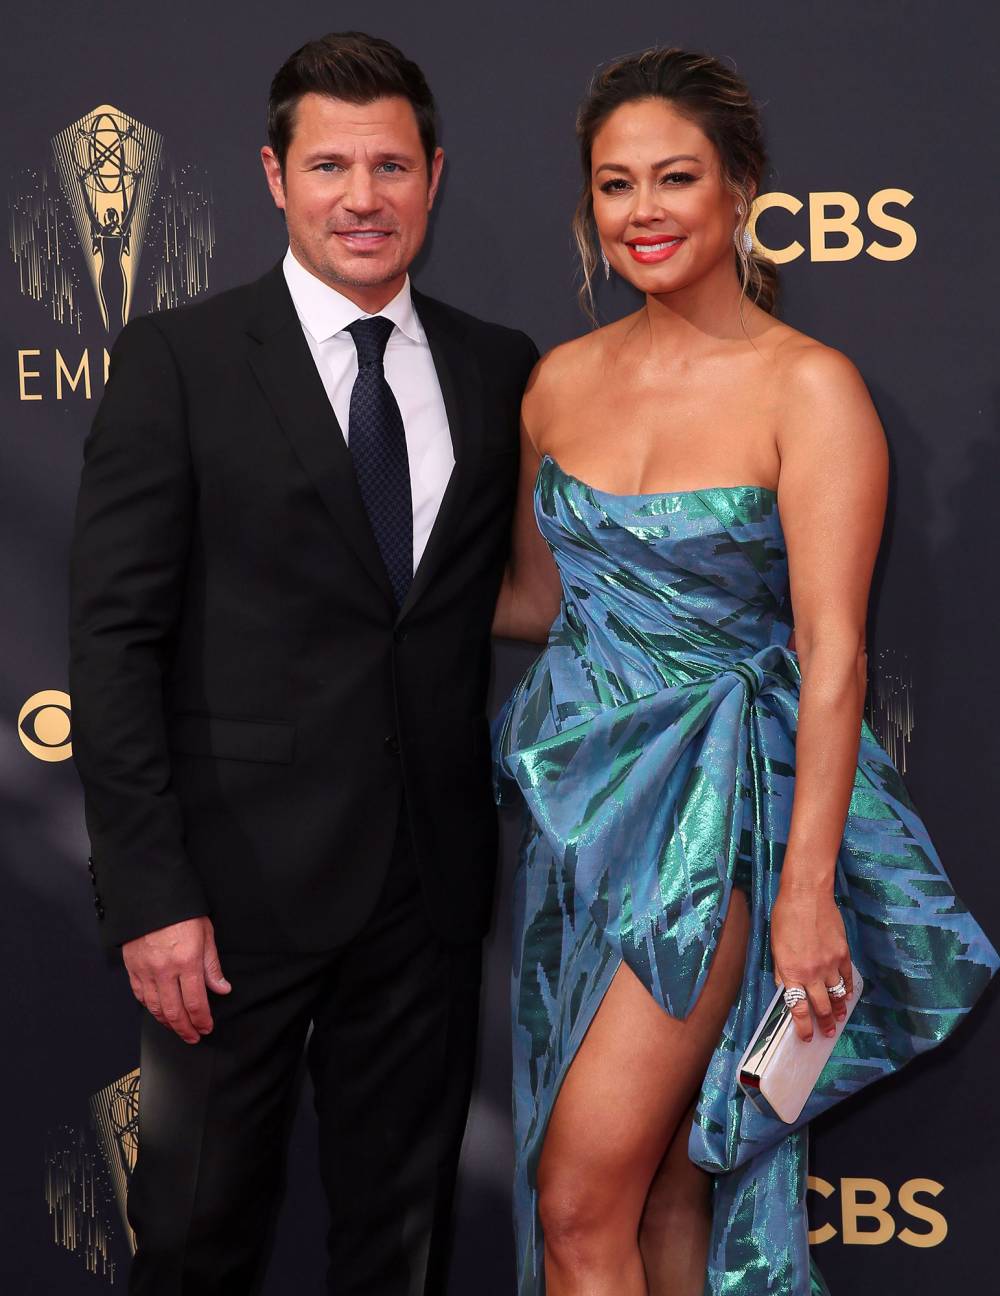 Nick Lachey Allegedly Tries to Grab Phone From Photographer's Hand After Night Out With Vanessa Lachey